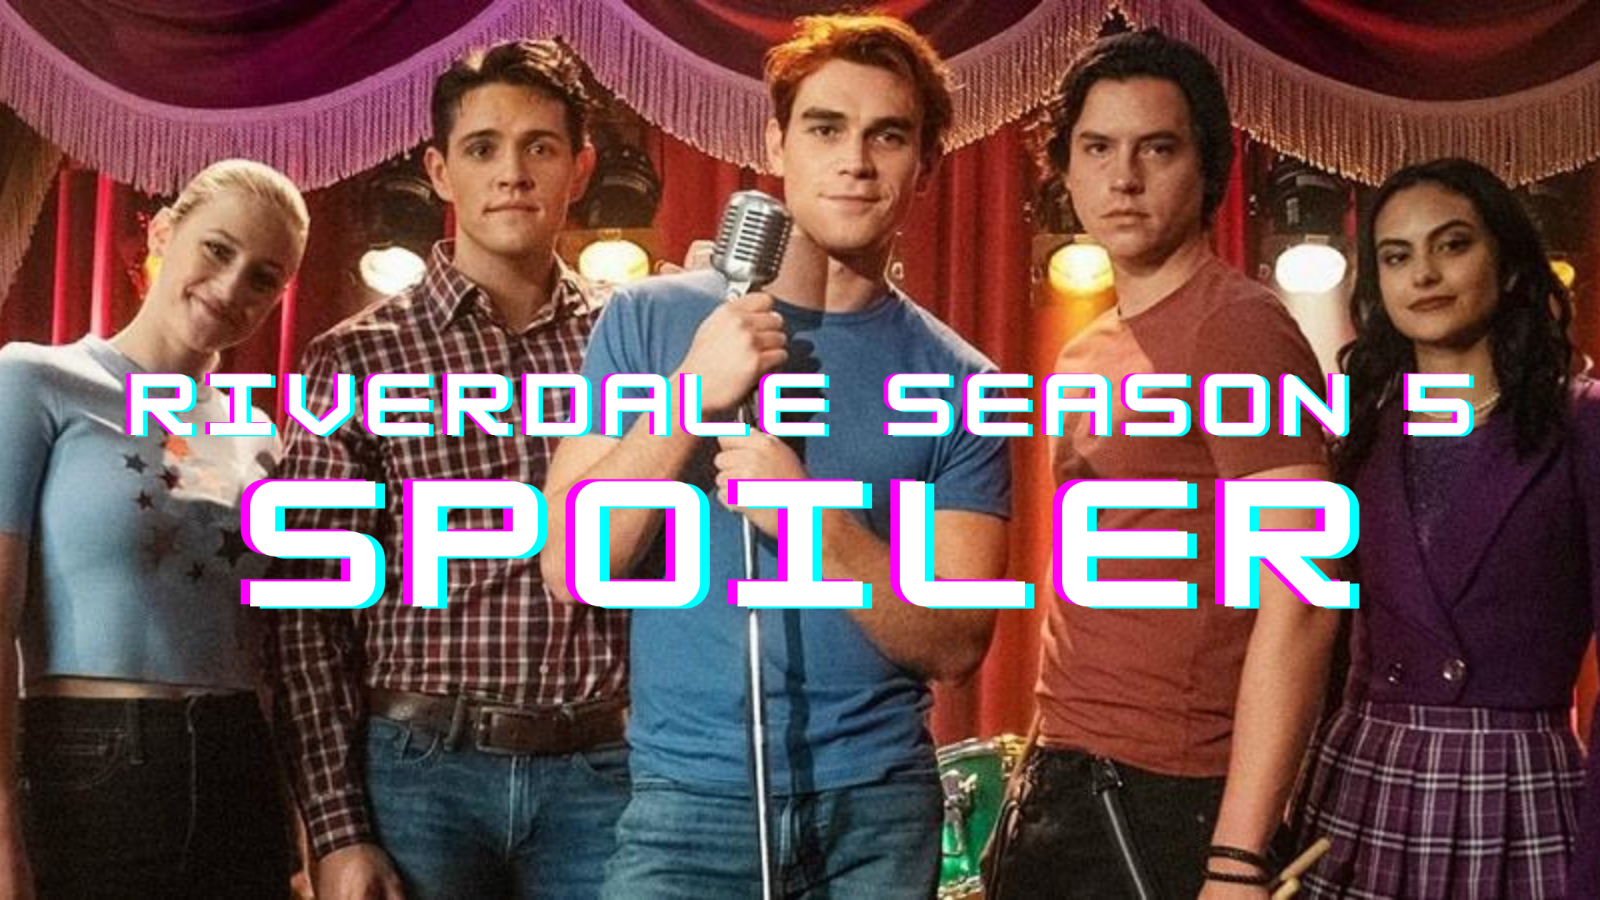 Riverdale Season 5: Veronica Married to Chad Gekko? Production has begun, Time Jump Confirmed Panther Tech